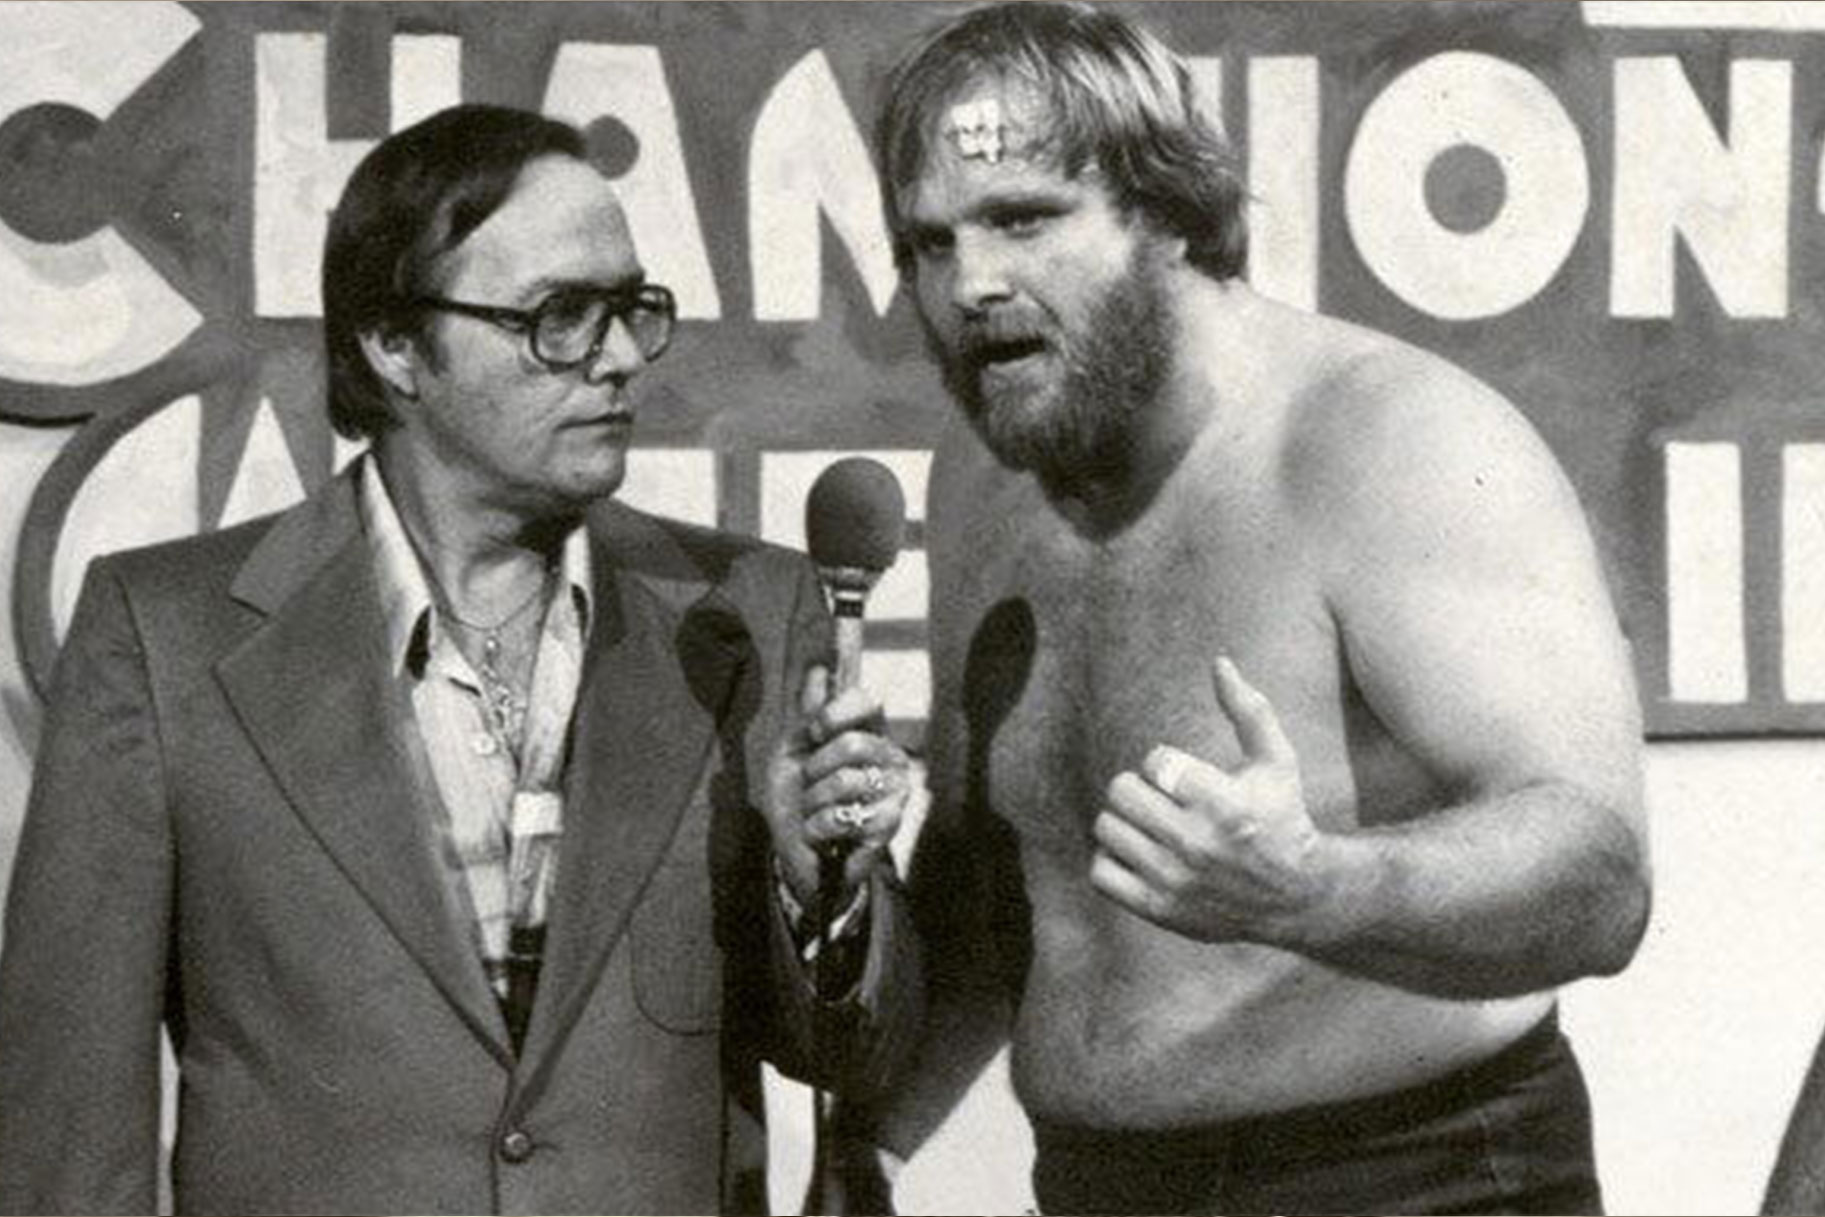 Ole Anderson speaks to a WWE correspondent